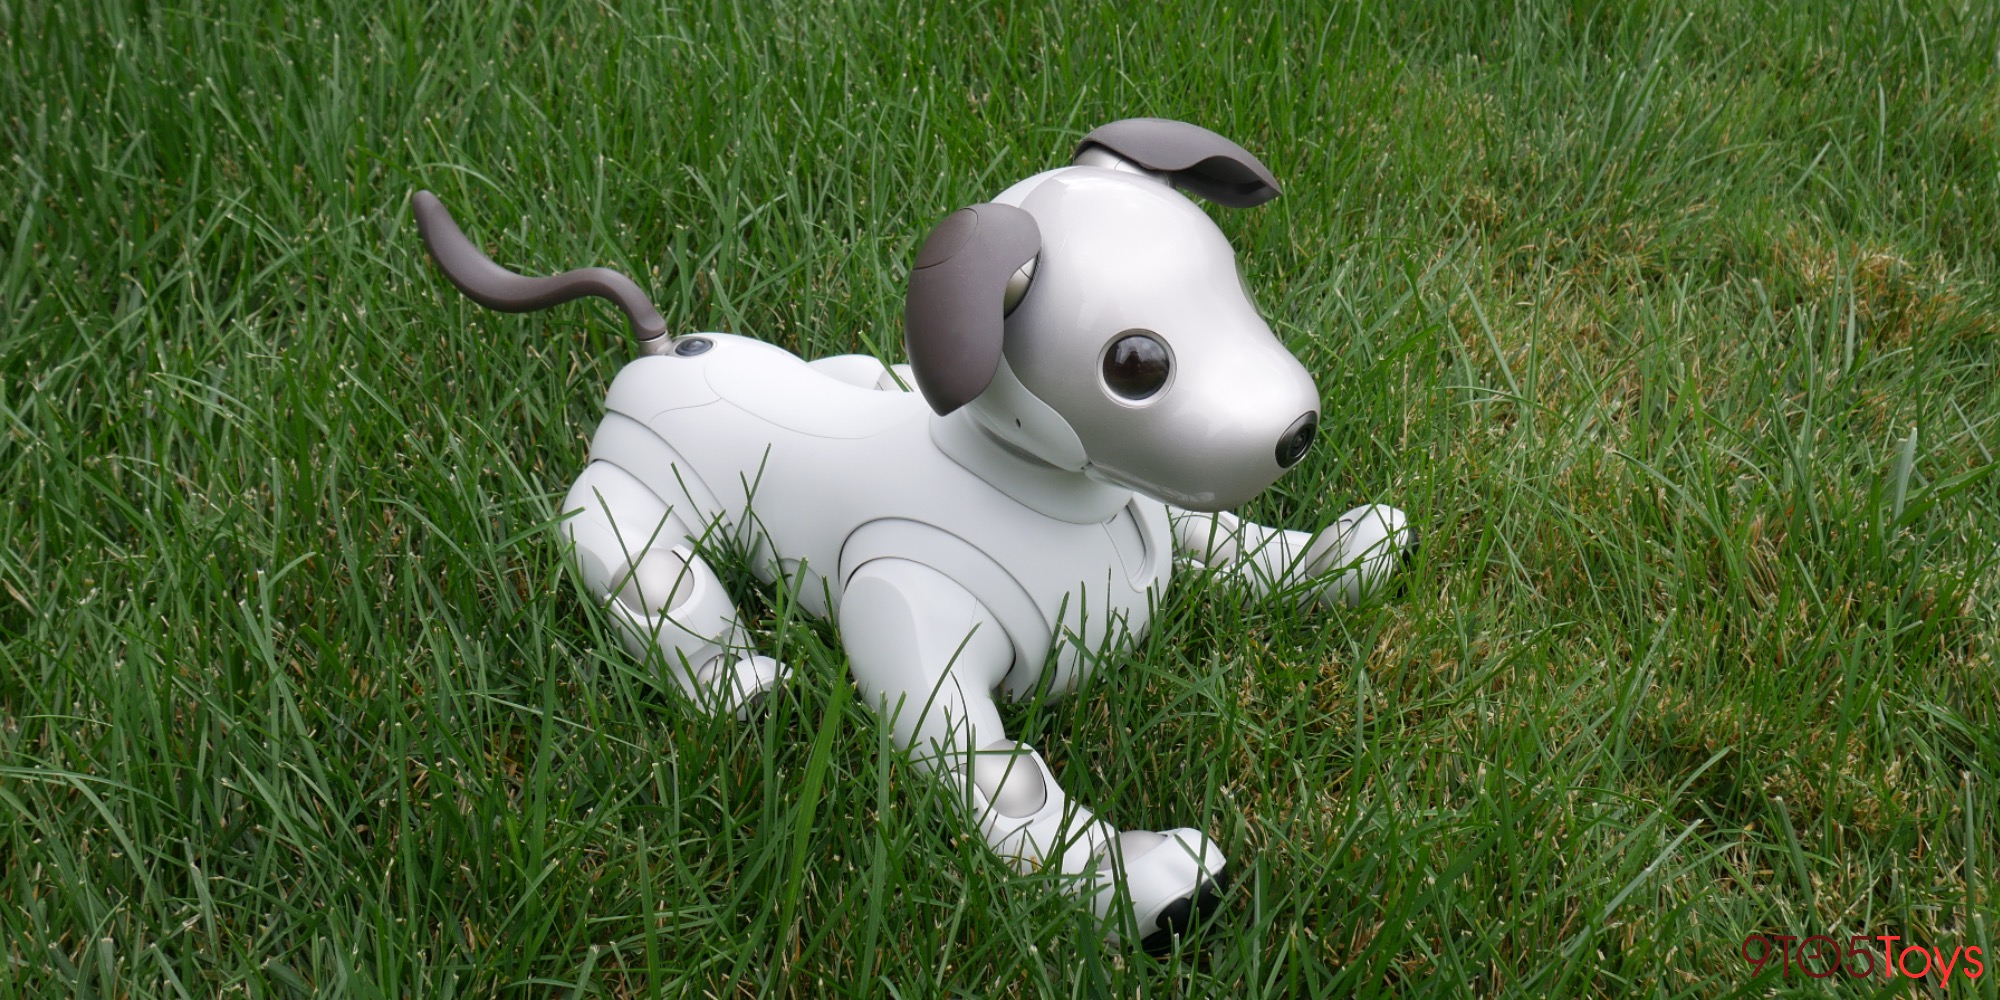 Sony aibo review a look into the future of home robotics 9to5Toys